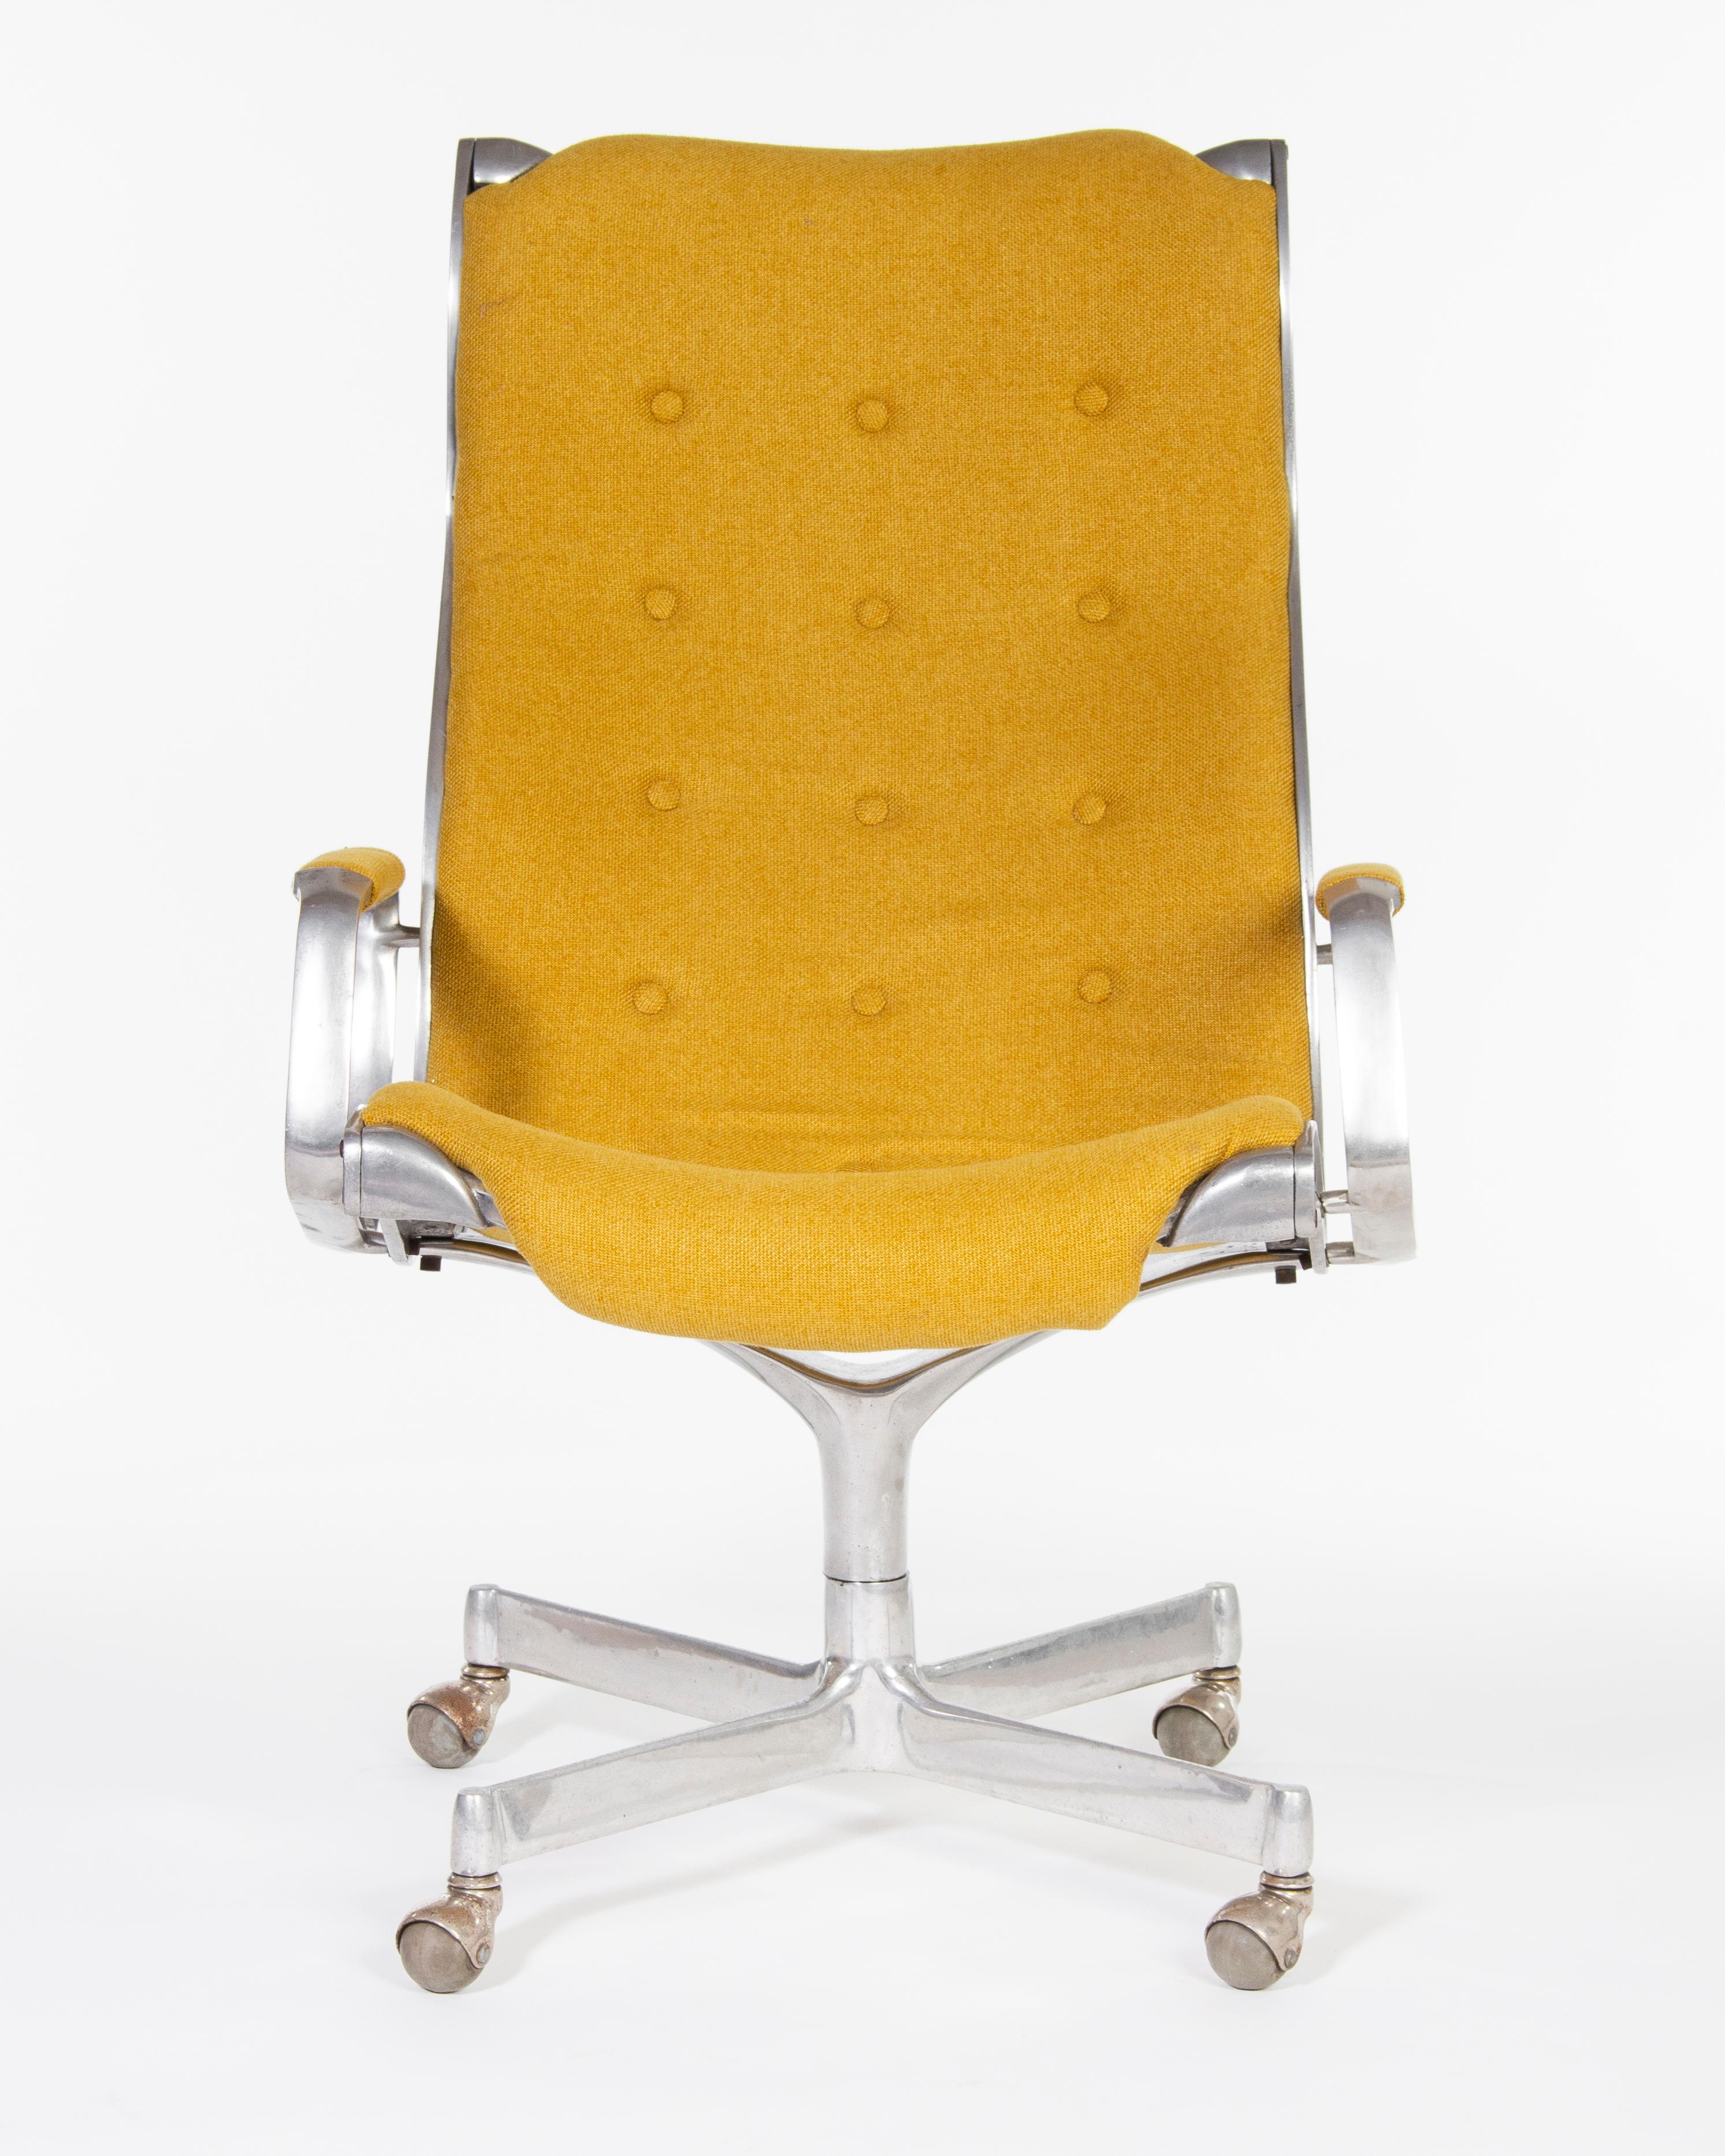 Swivel chair designed by Hungarian furniture architect Rudolf Szedleczky, from the 1970s.
 